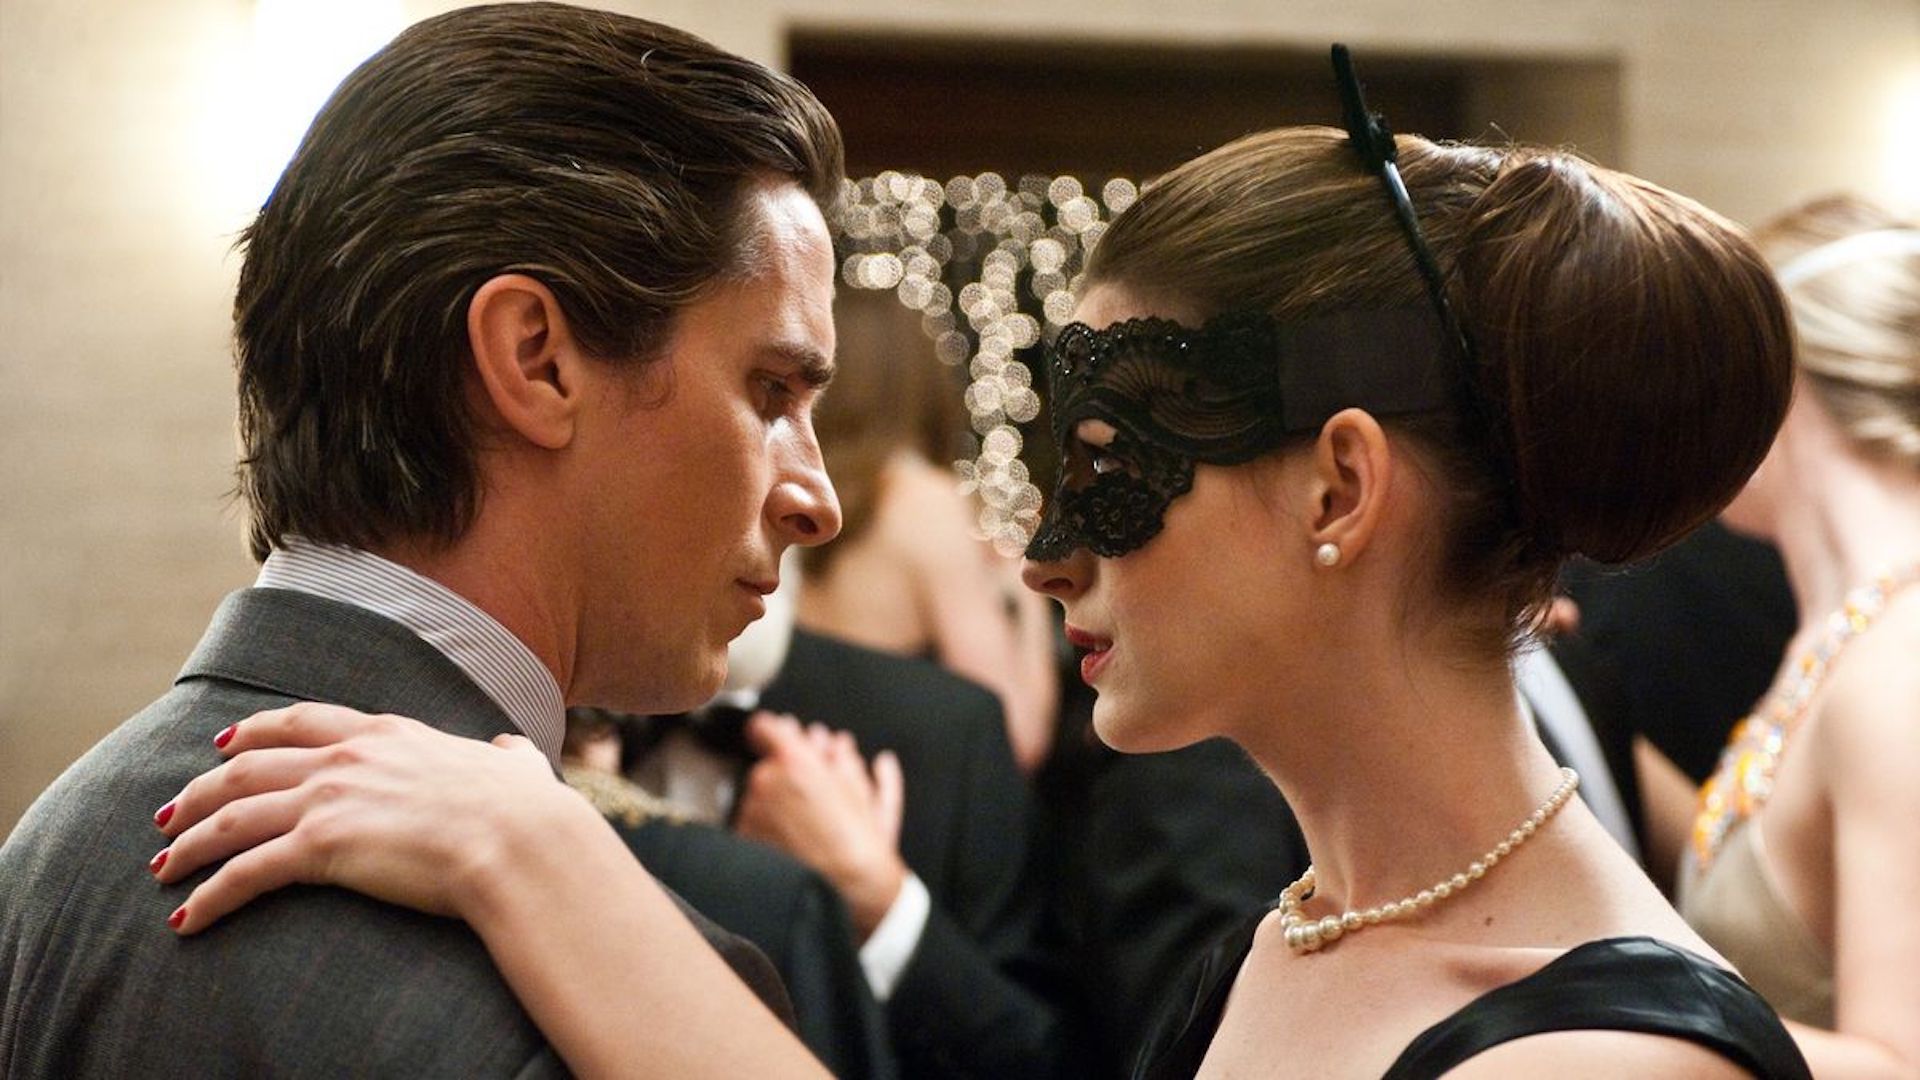 Christian Bale and Anne Hathaway in The Dark Knight Rises 